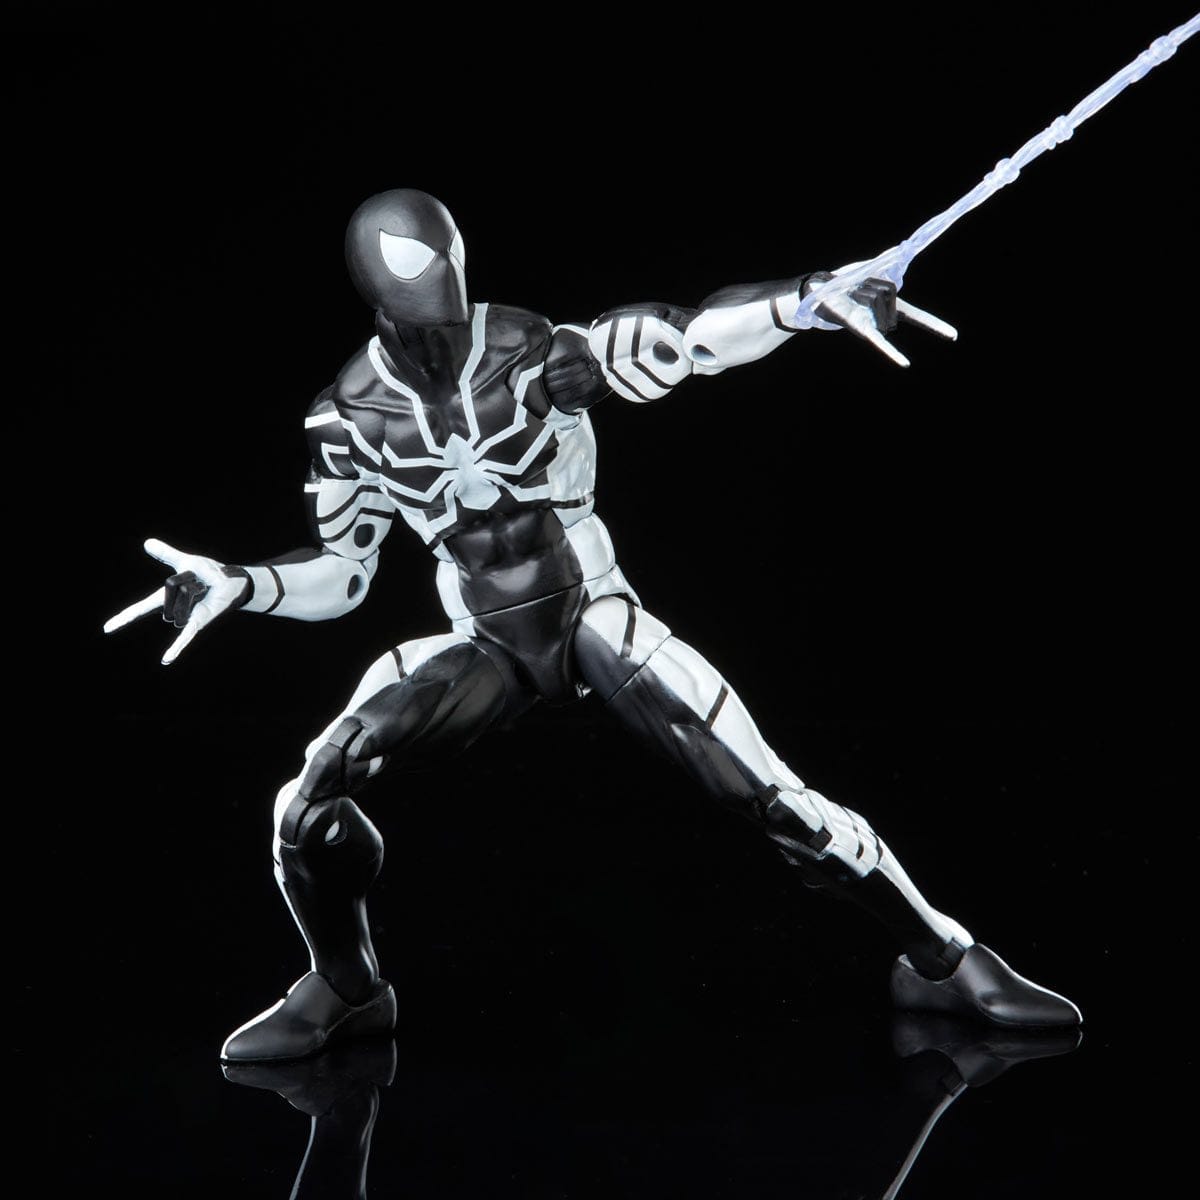 Future Foundation Spider-Man Stealth Suit Hasbro Marvel Legends Series Action Figure Media with web